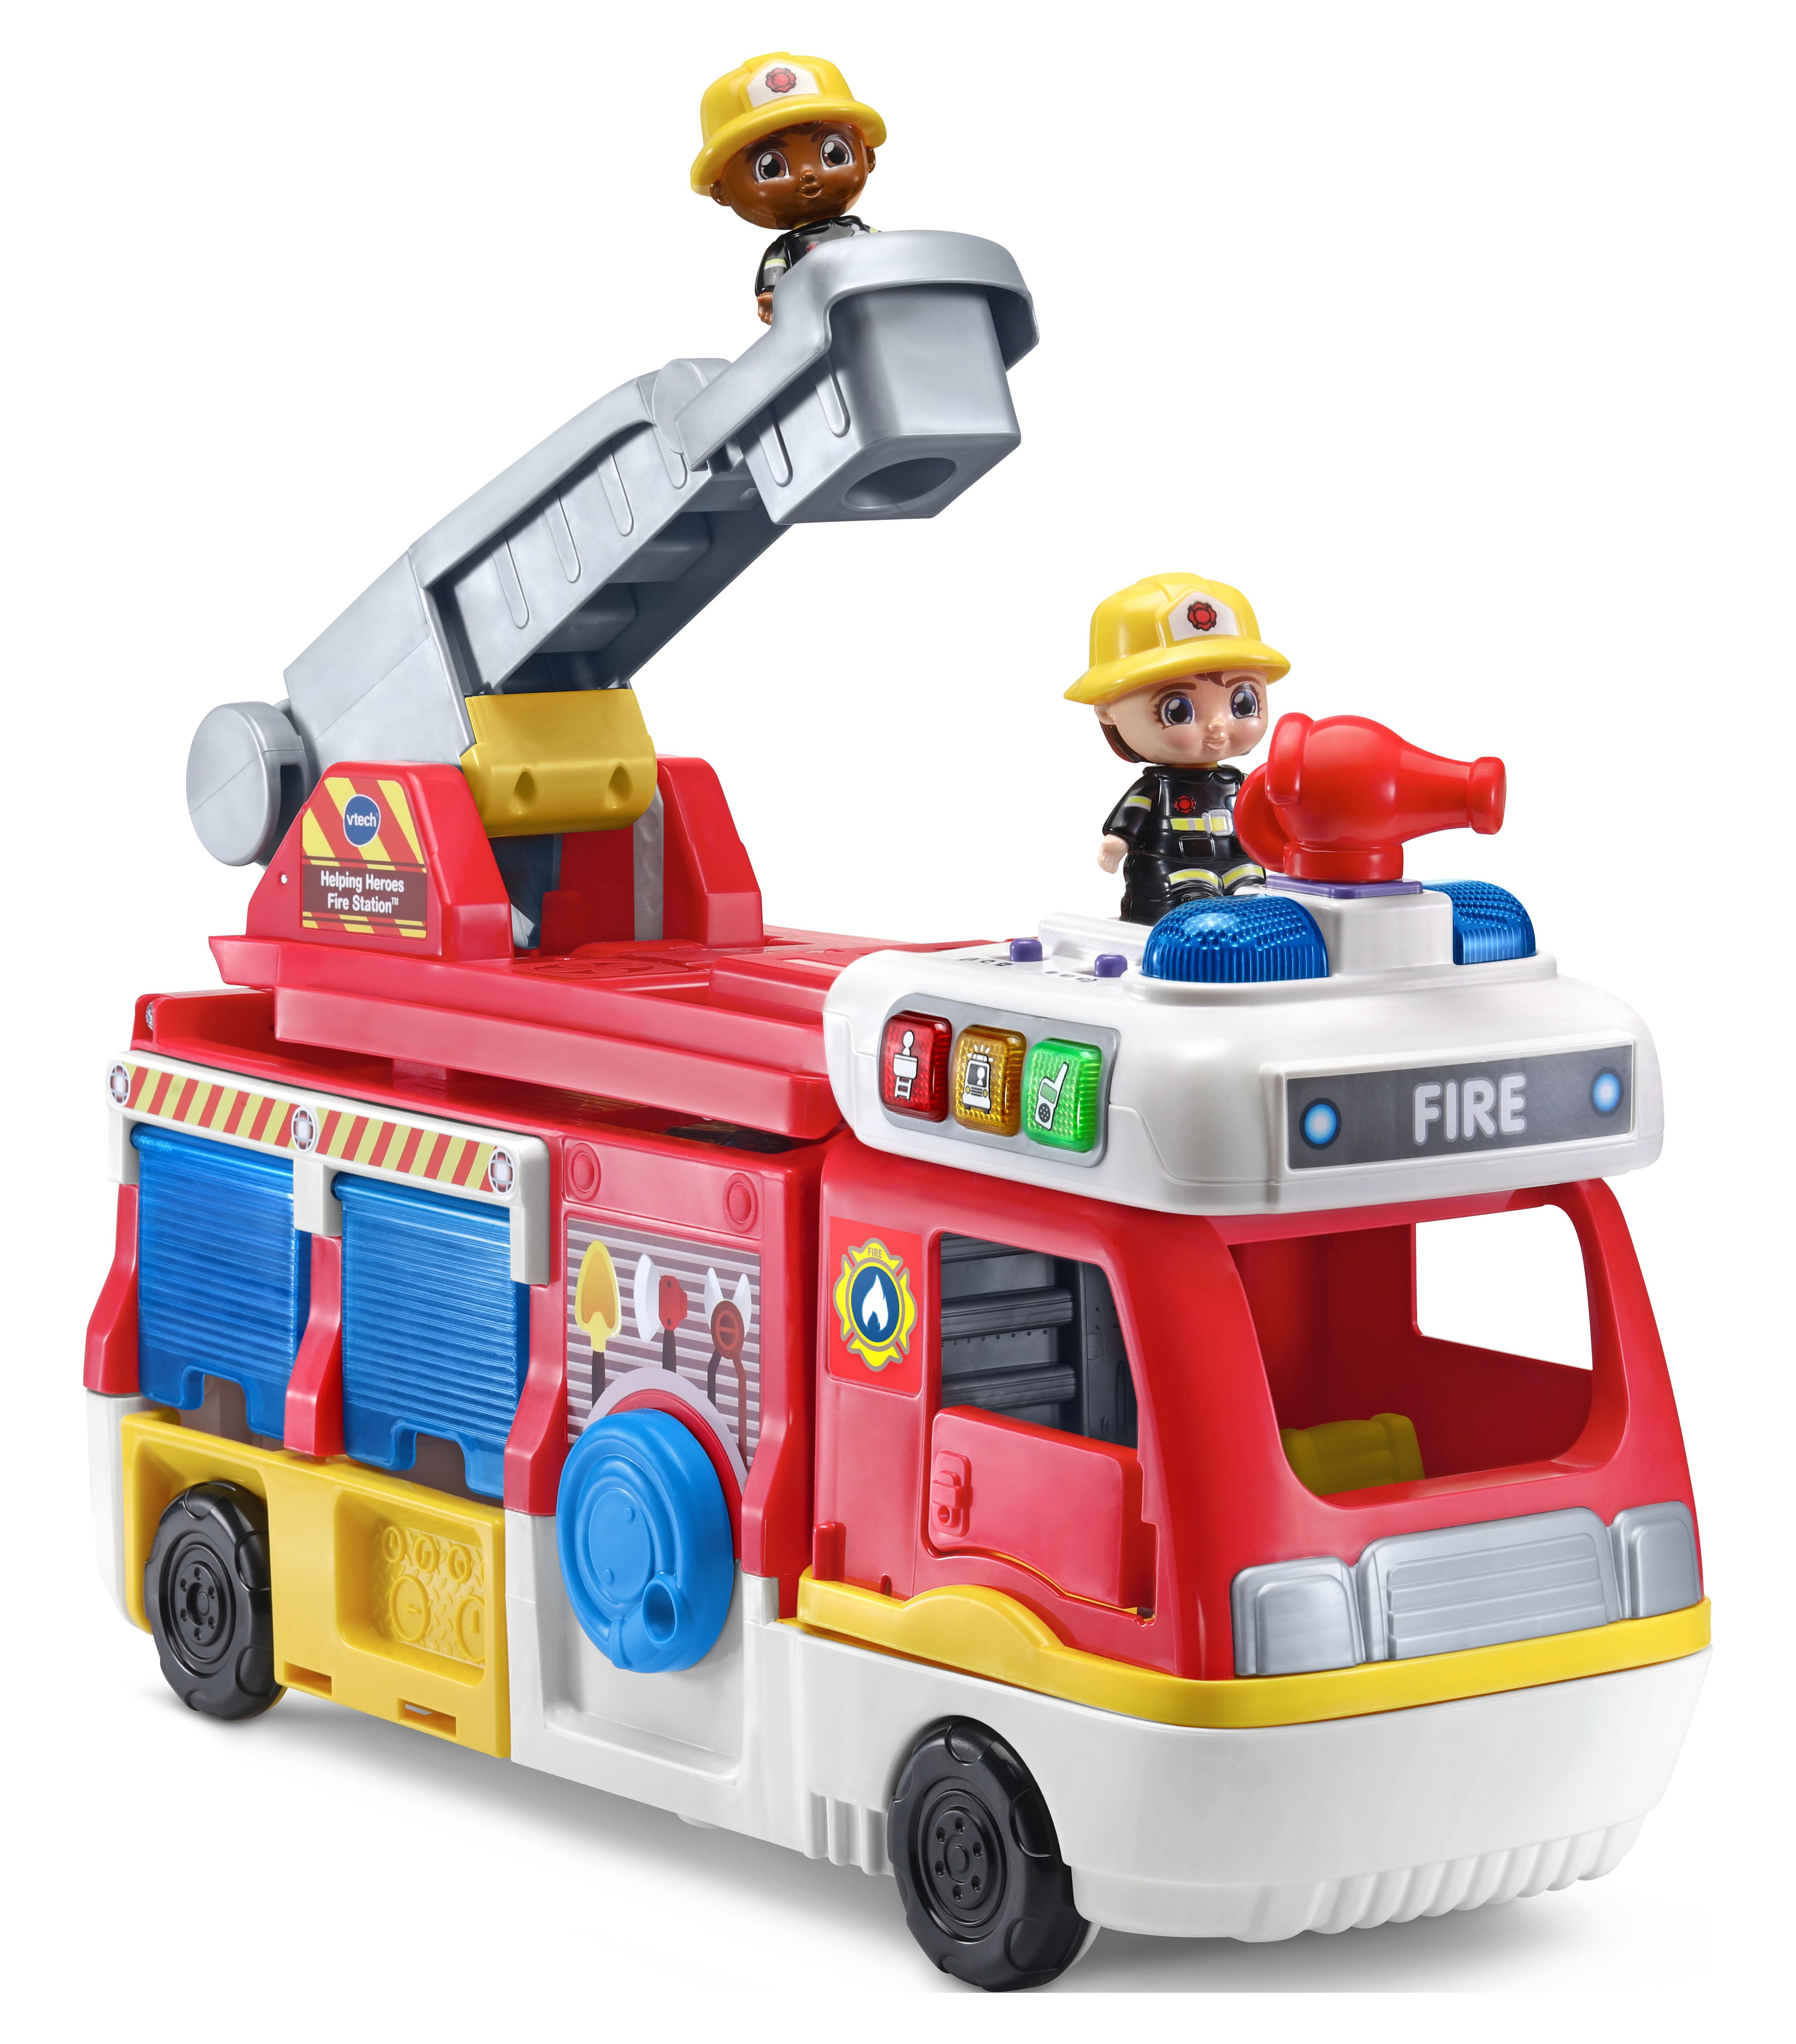 VTech® Helping Heroes Fire Station™ Playset With Two Firefighters, Fire Truck Vehicle for Infants and Toddlers - image 1 of 14